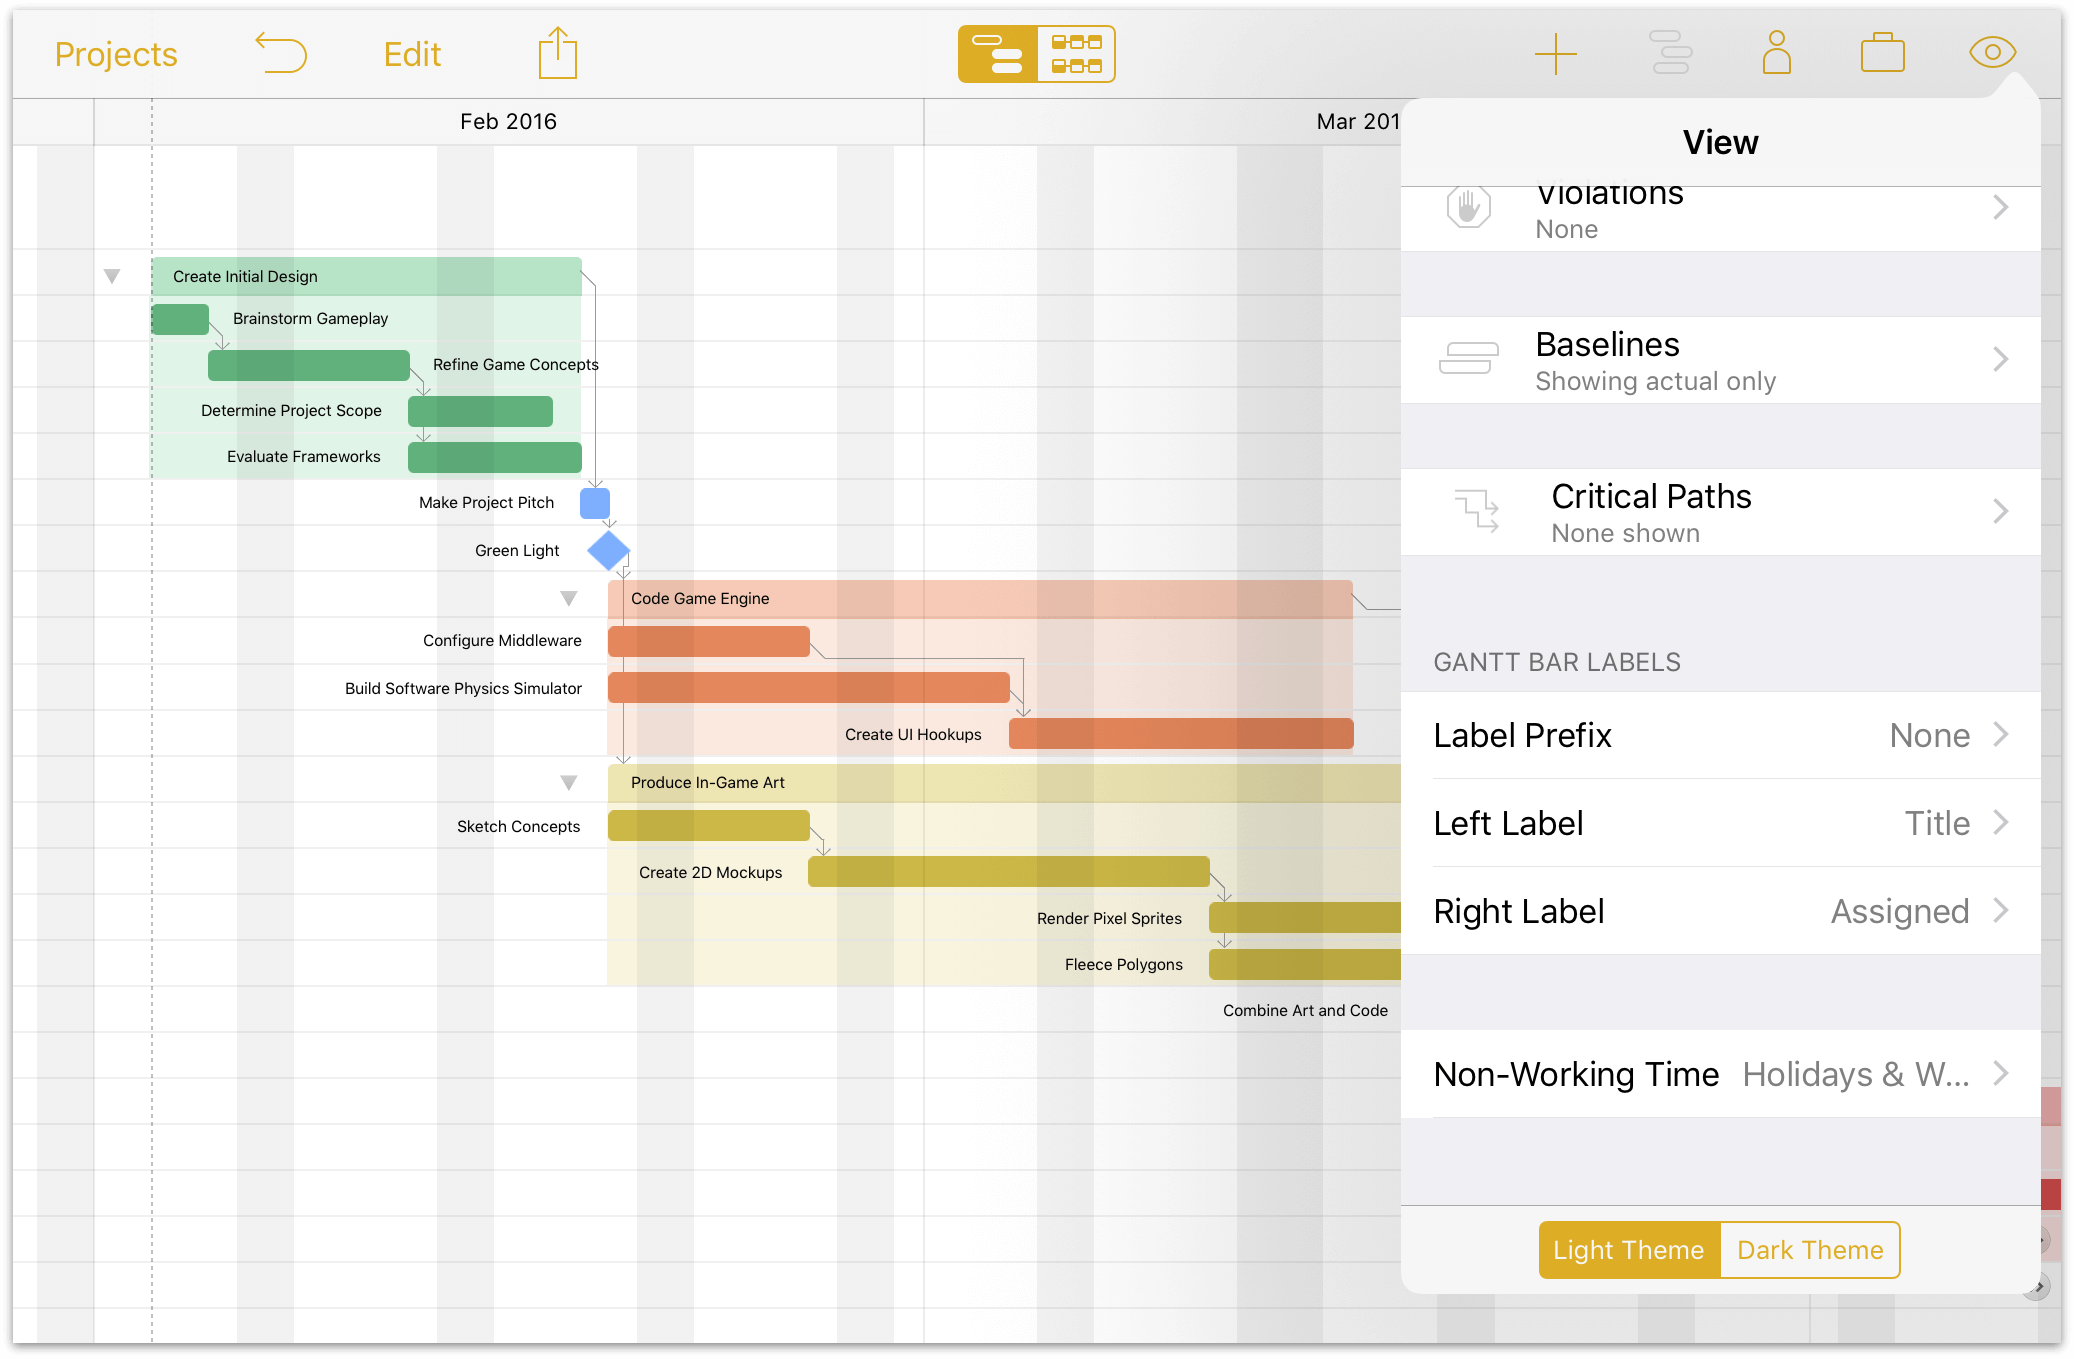 The Gantt chart with non-working hours displayed.